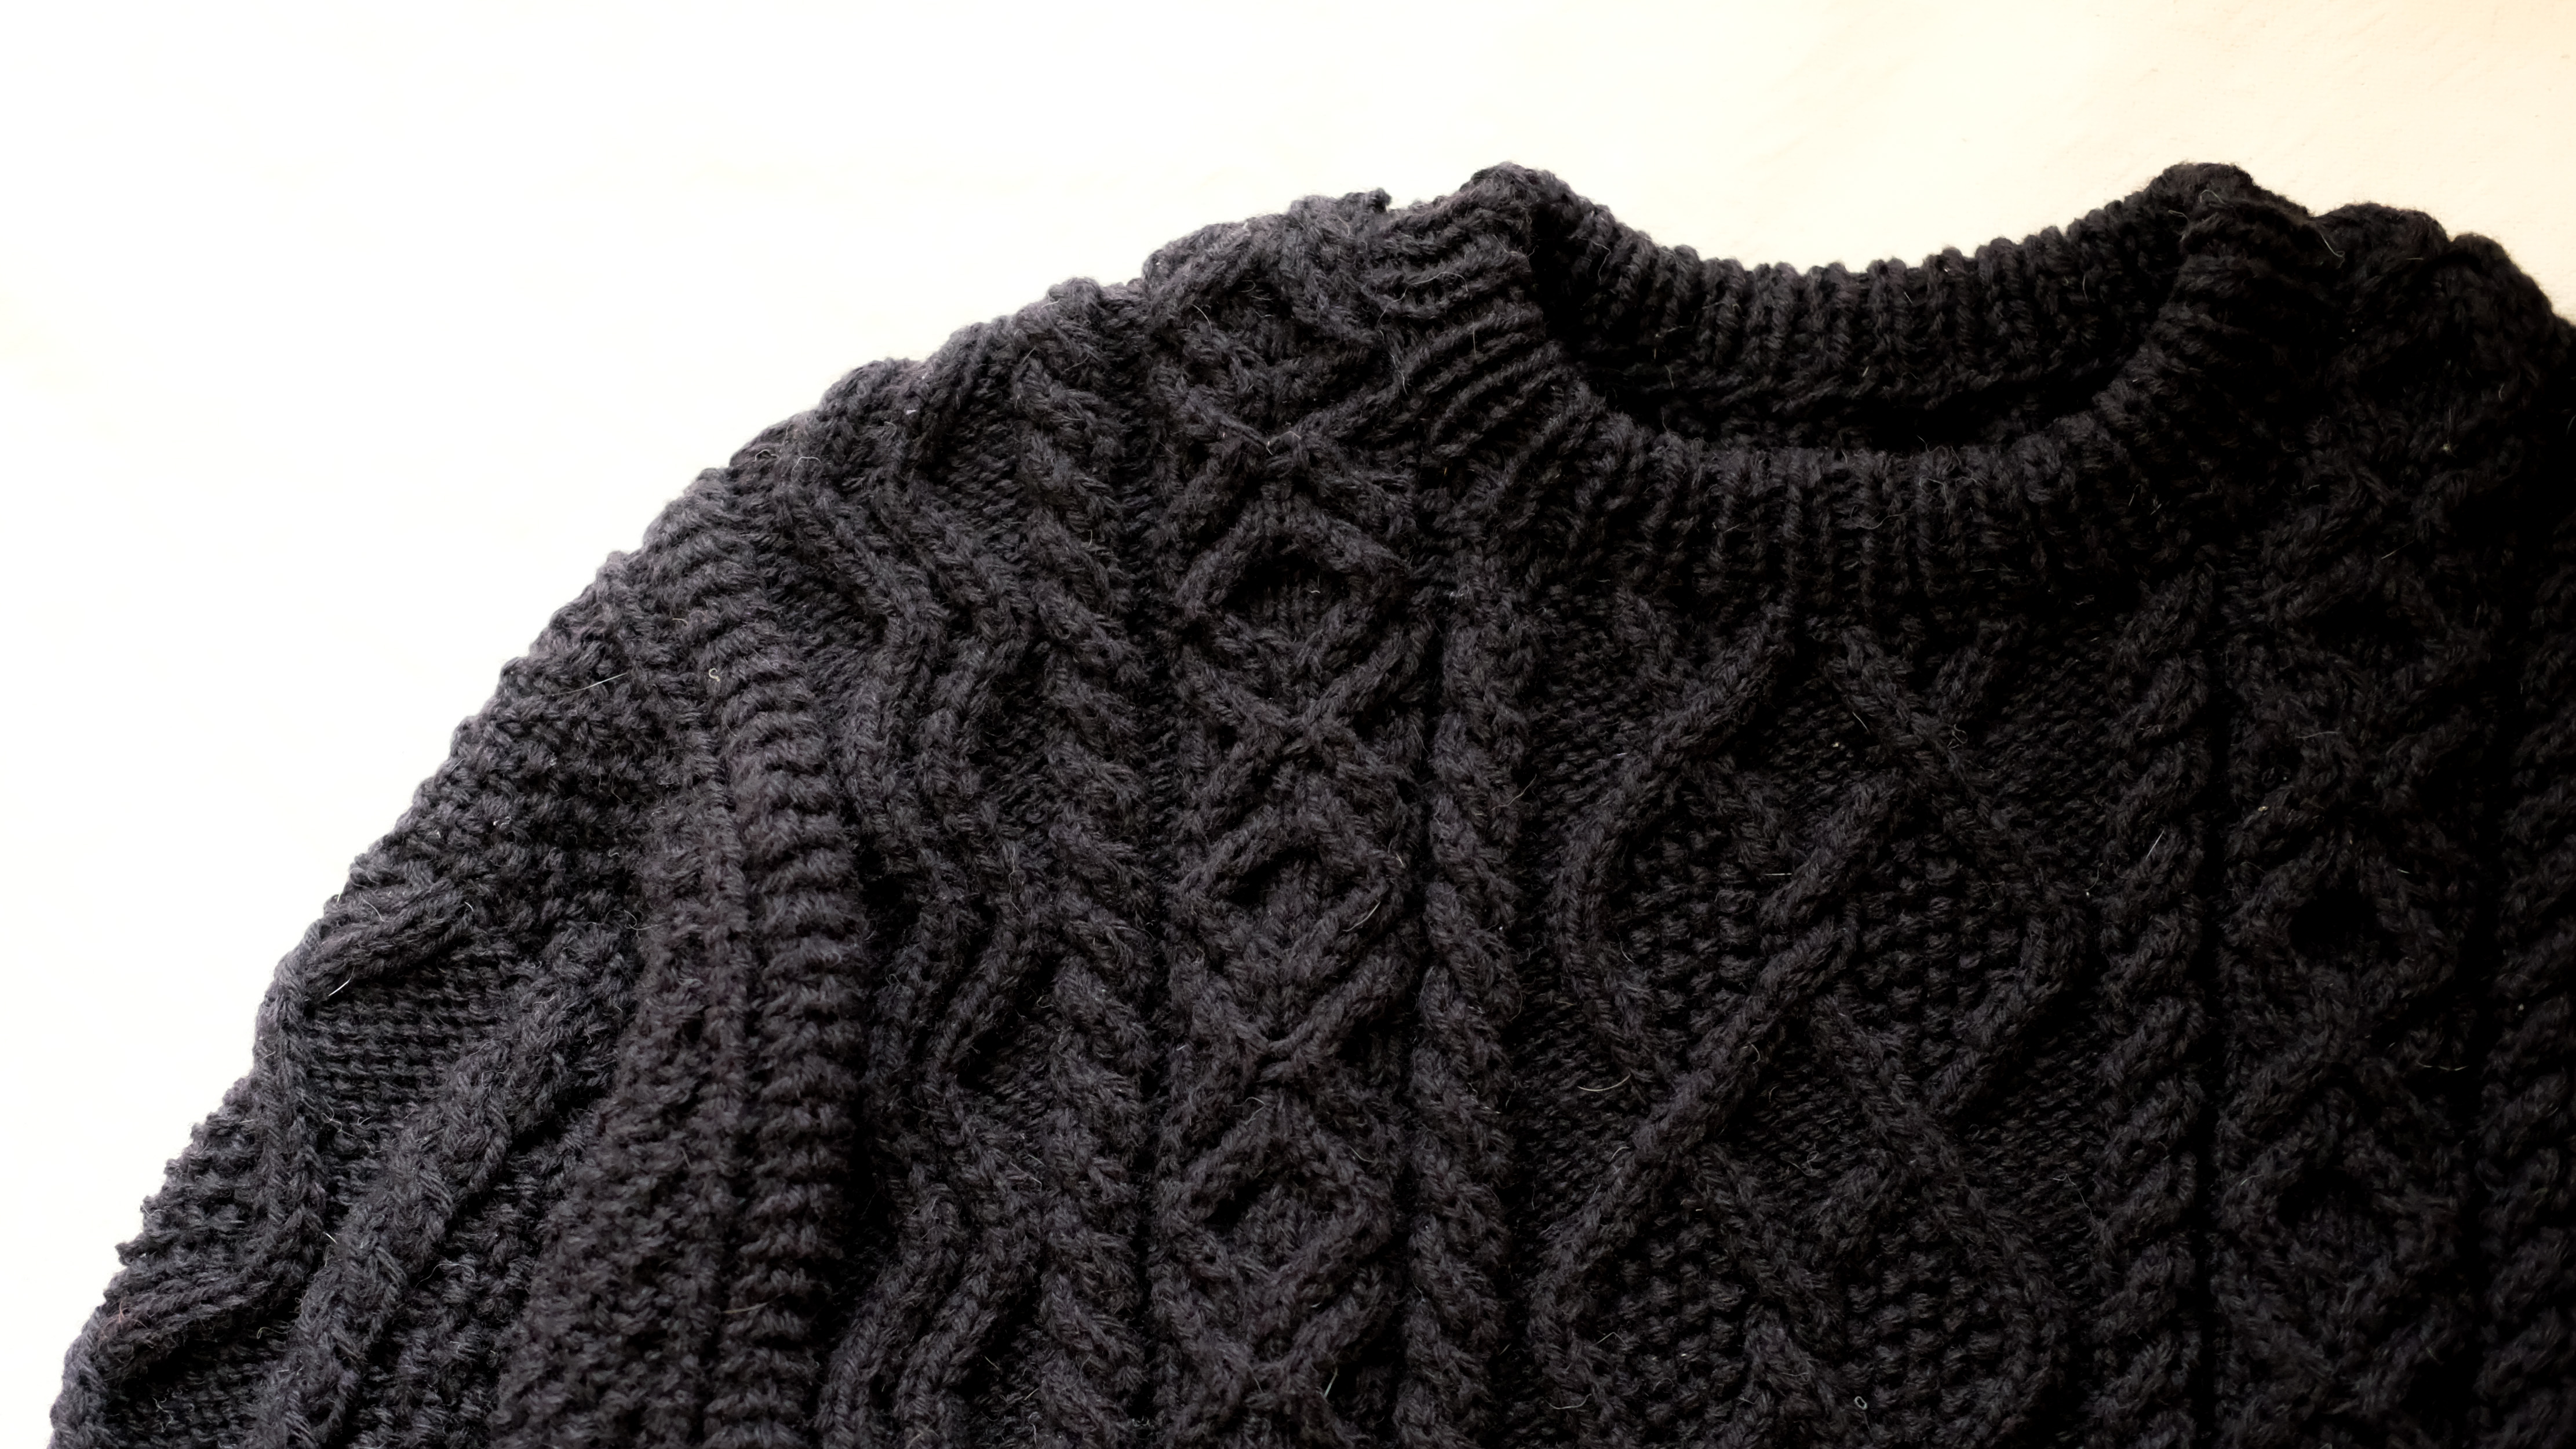 “Aran Sweater for men” by HELLO, HYGGE LIFE